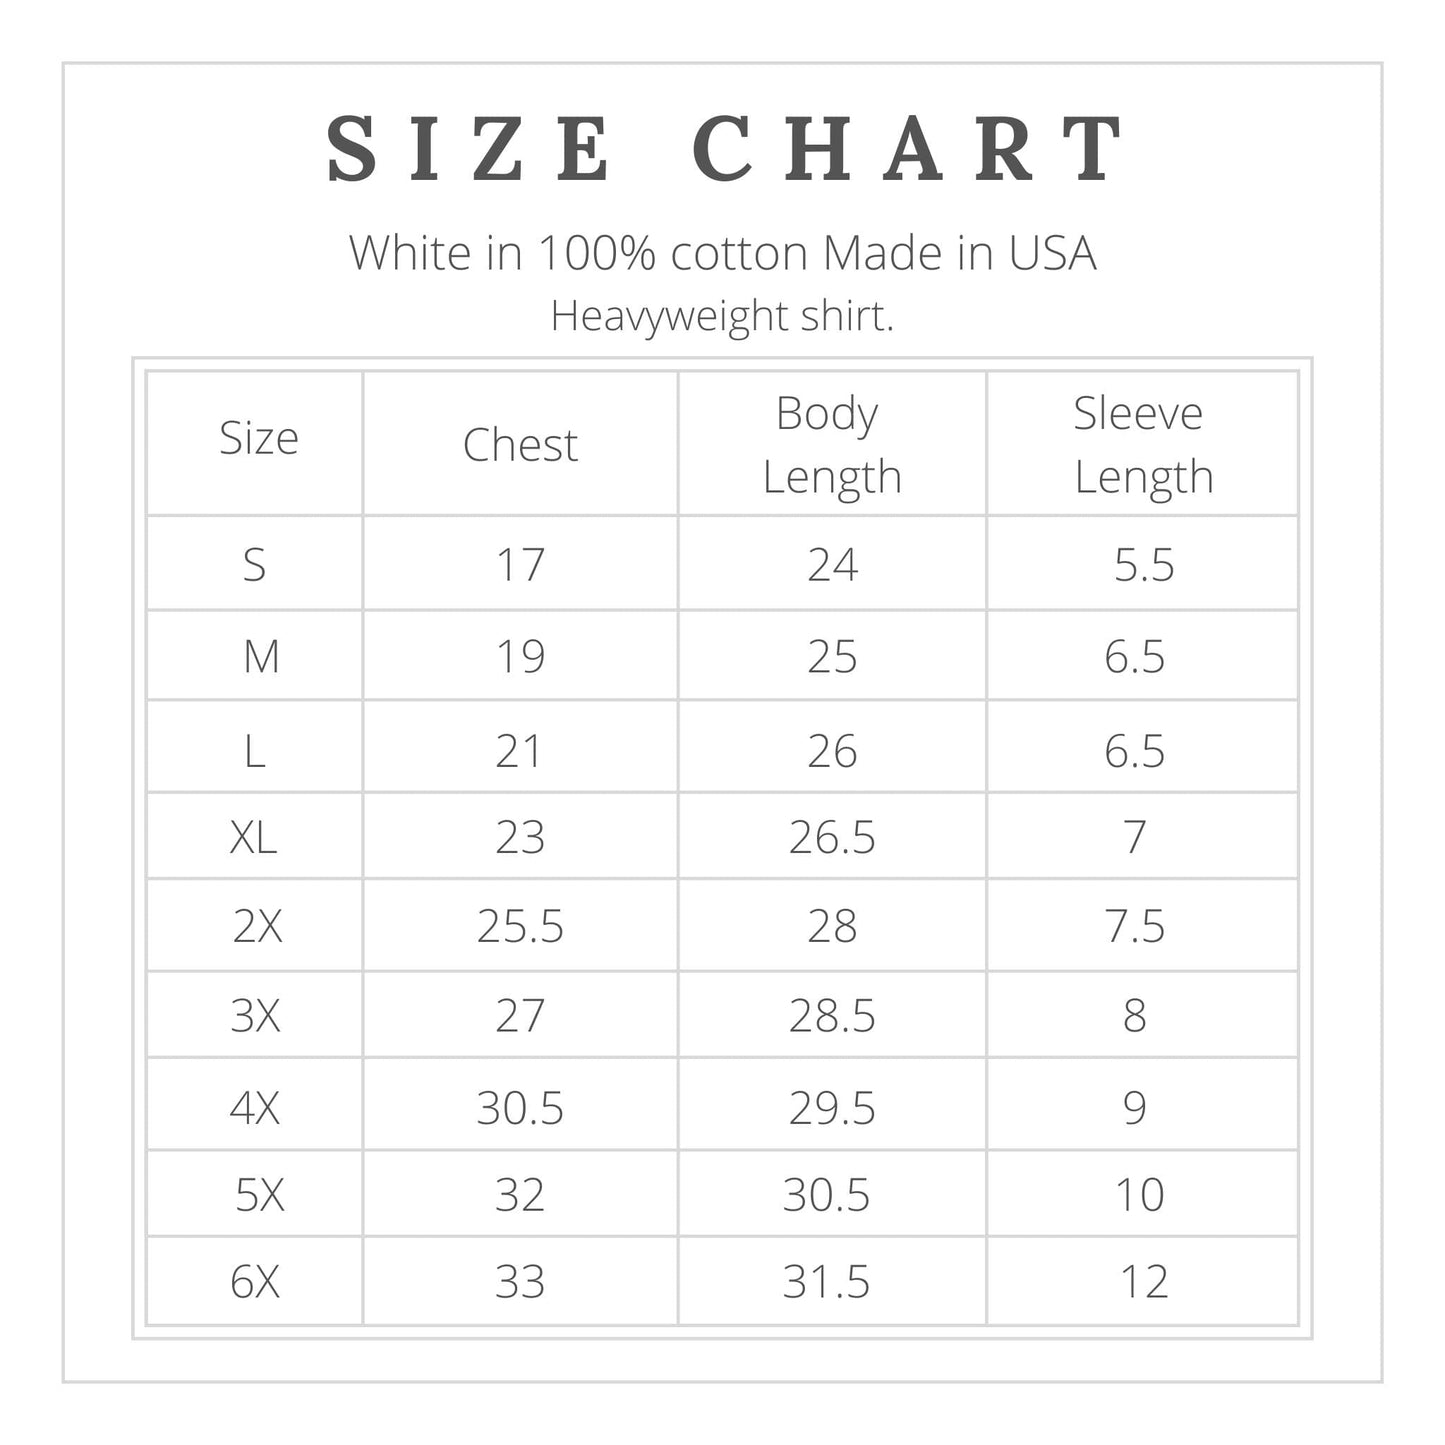 Size chart of the Made in USA shirt of "We hold these truths - July 4, 1776” T-shirt from The History List store